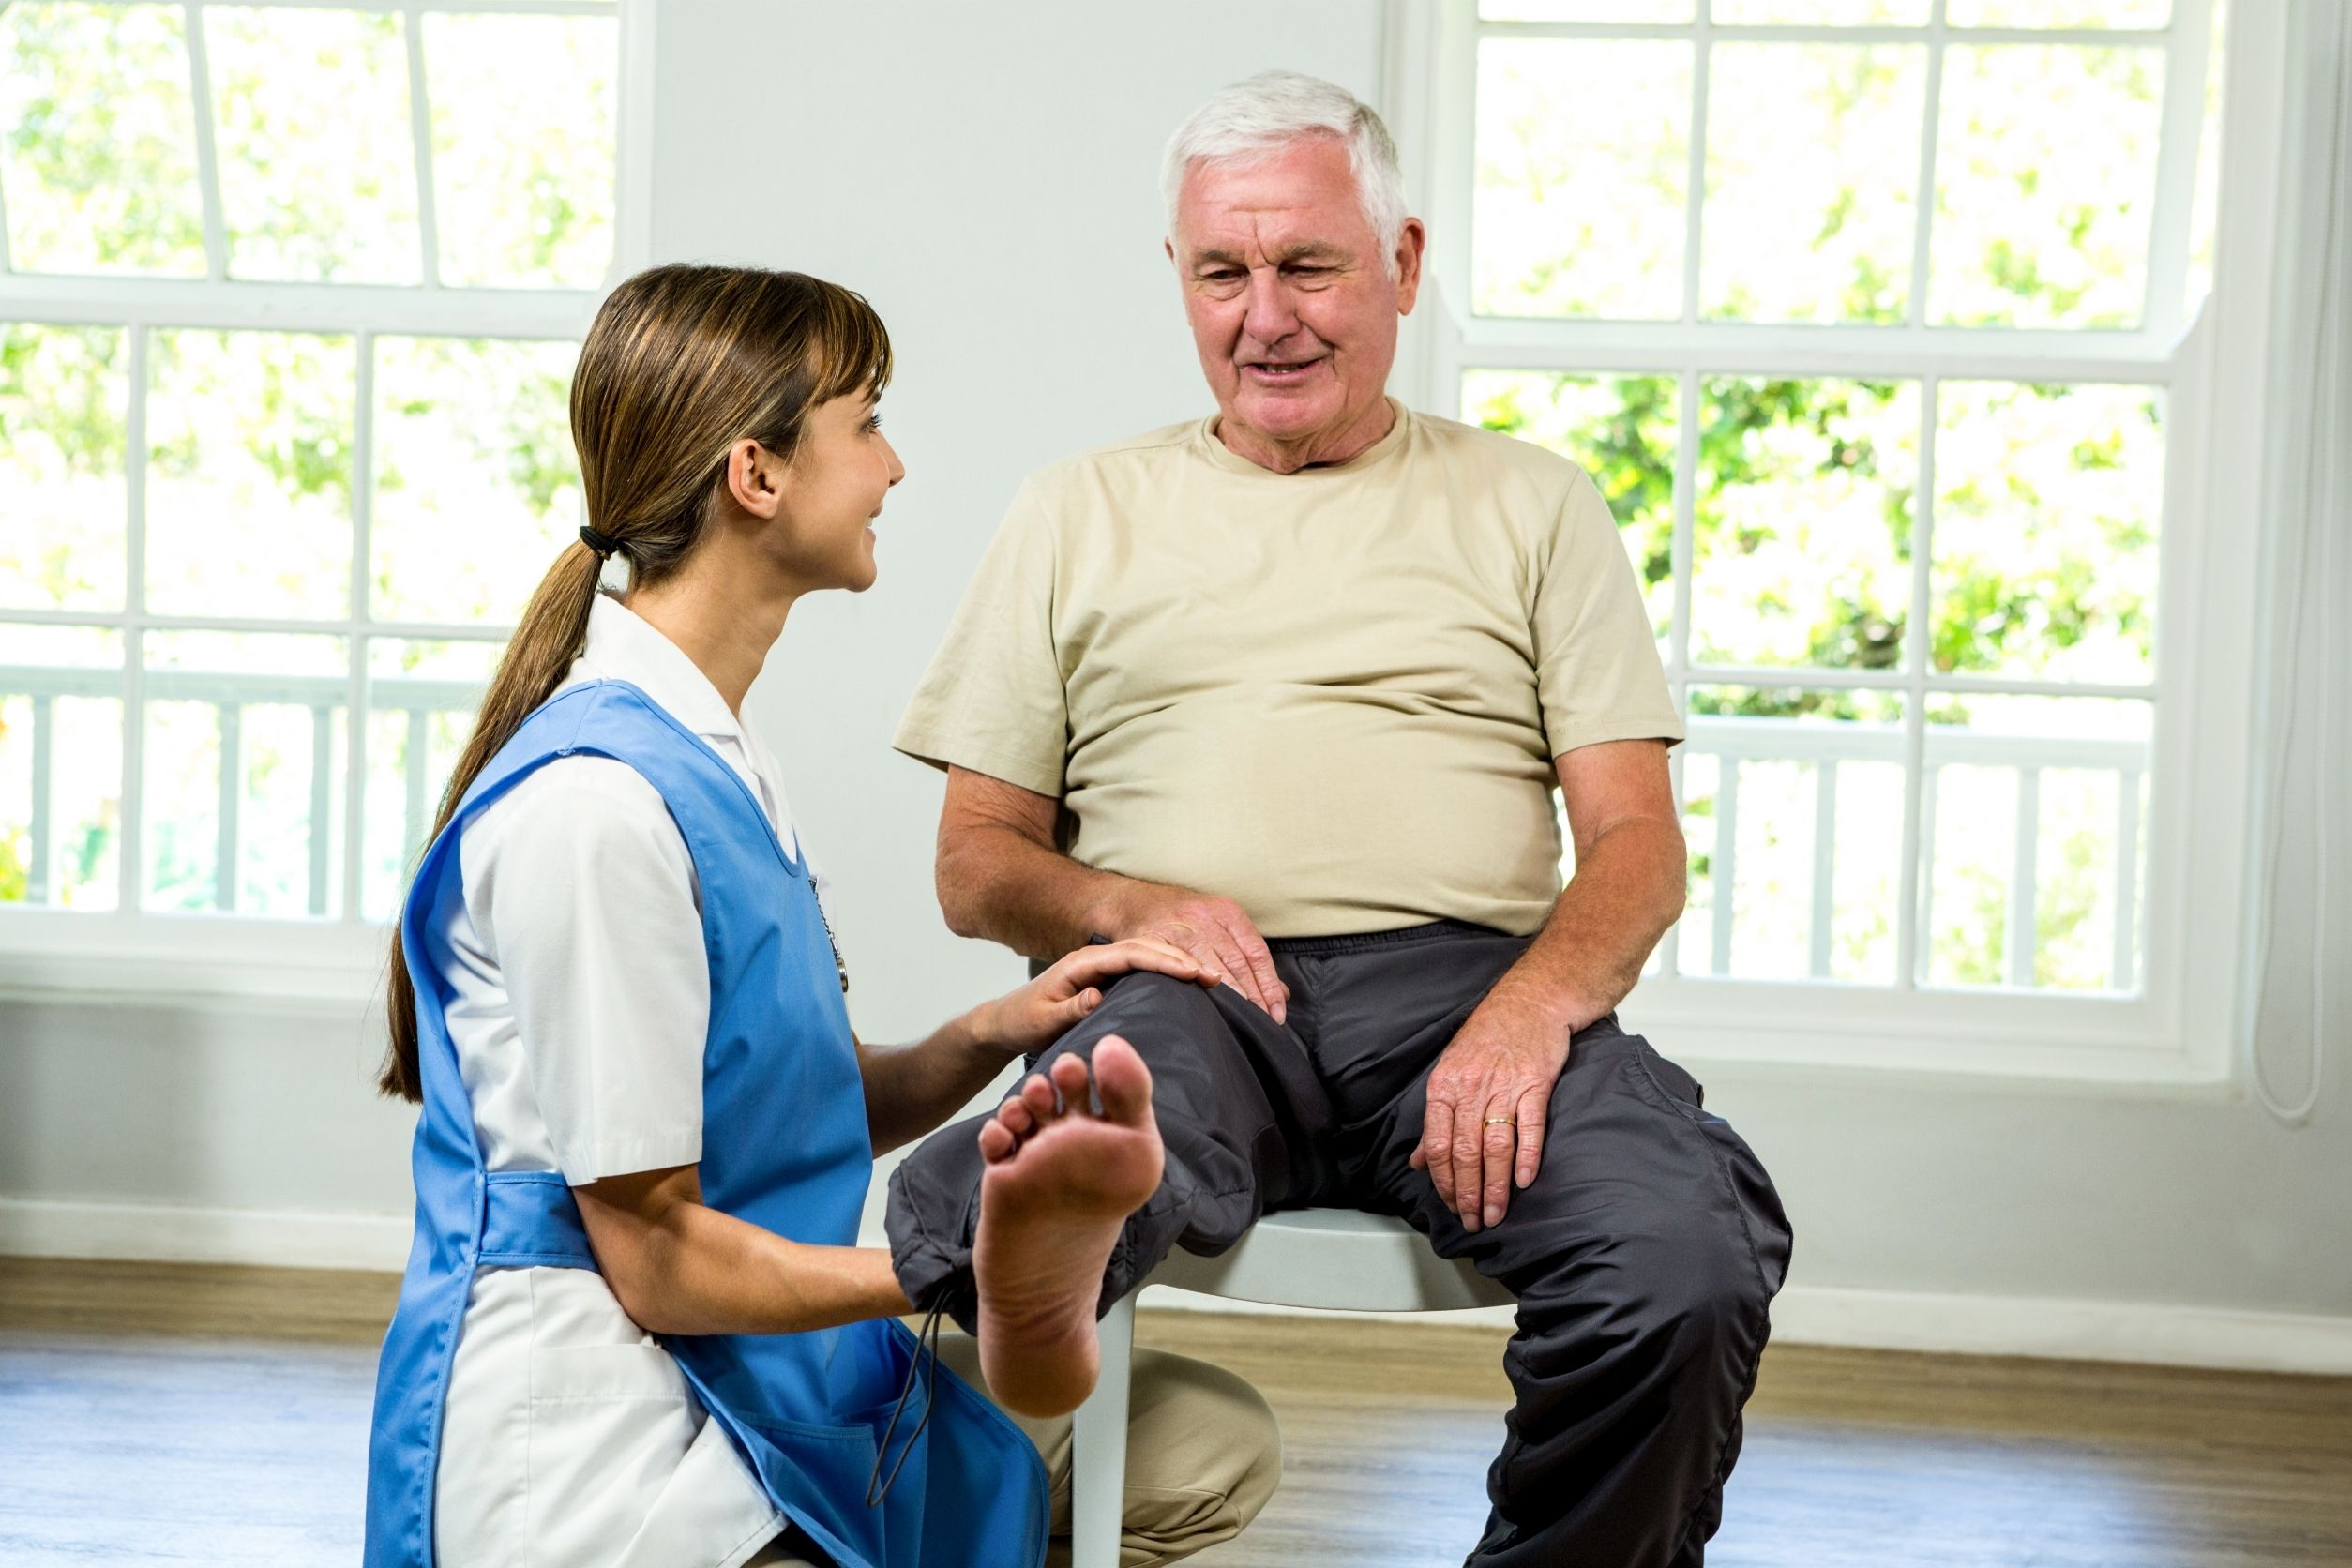 5 Reasons Why A Physical Therapy Assistant Degree Is A Good Choice